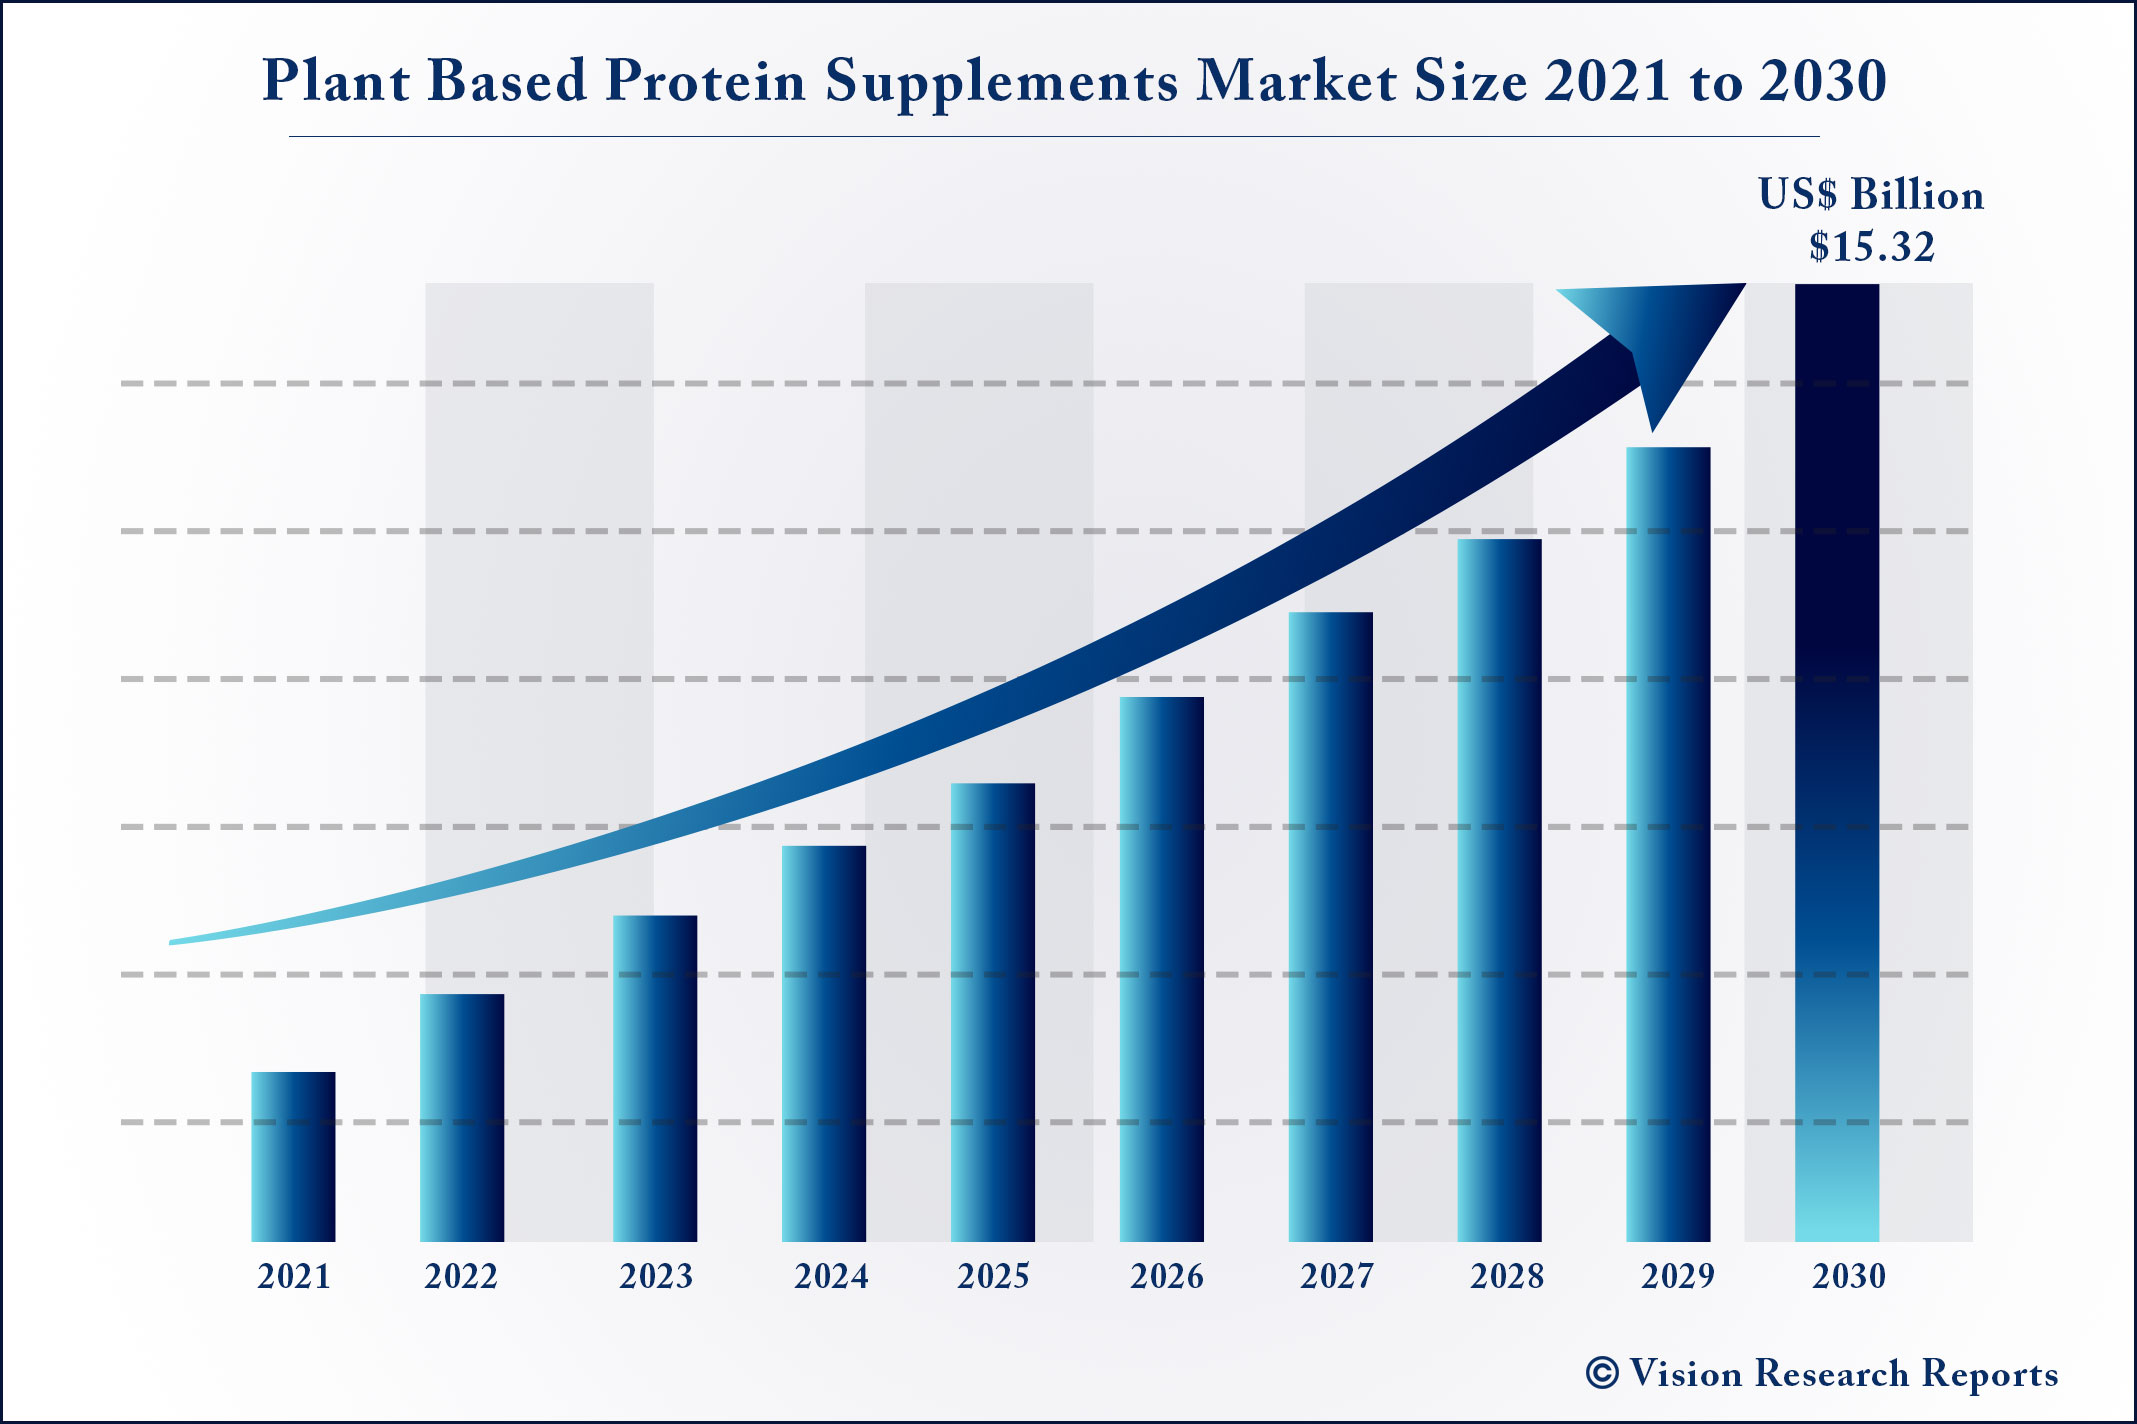 Plant Based Protein Supplements Market Size 2021 to 2030